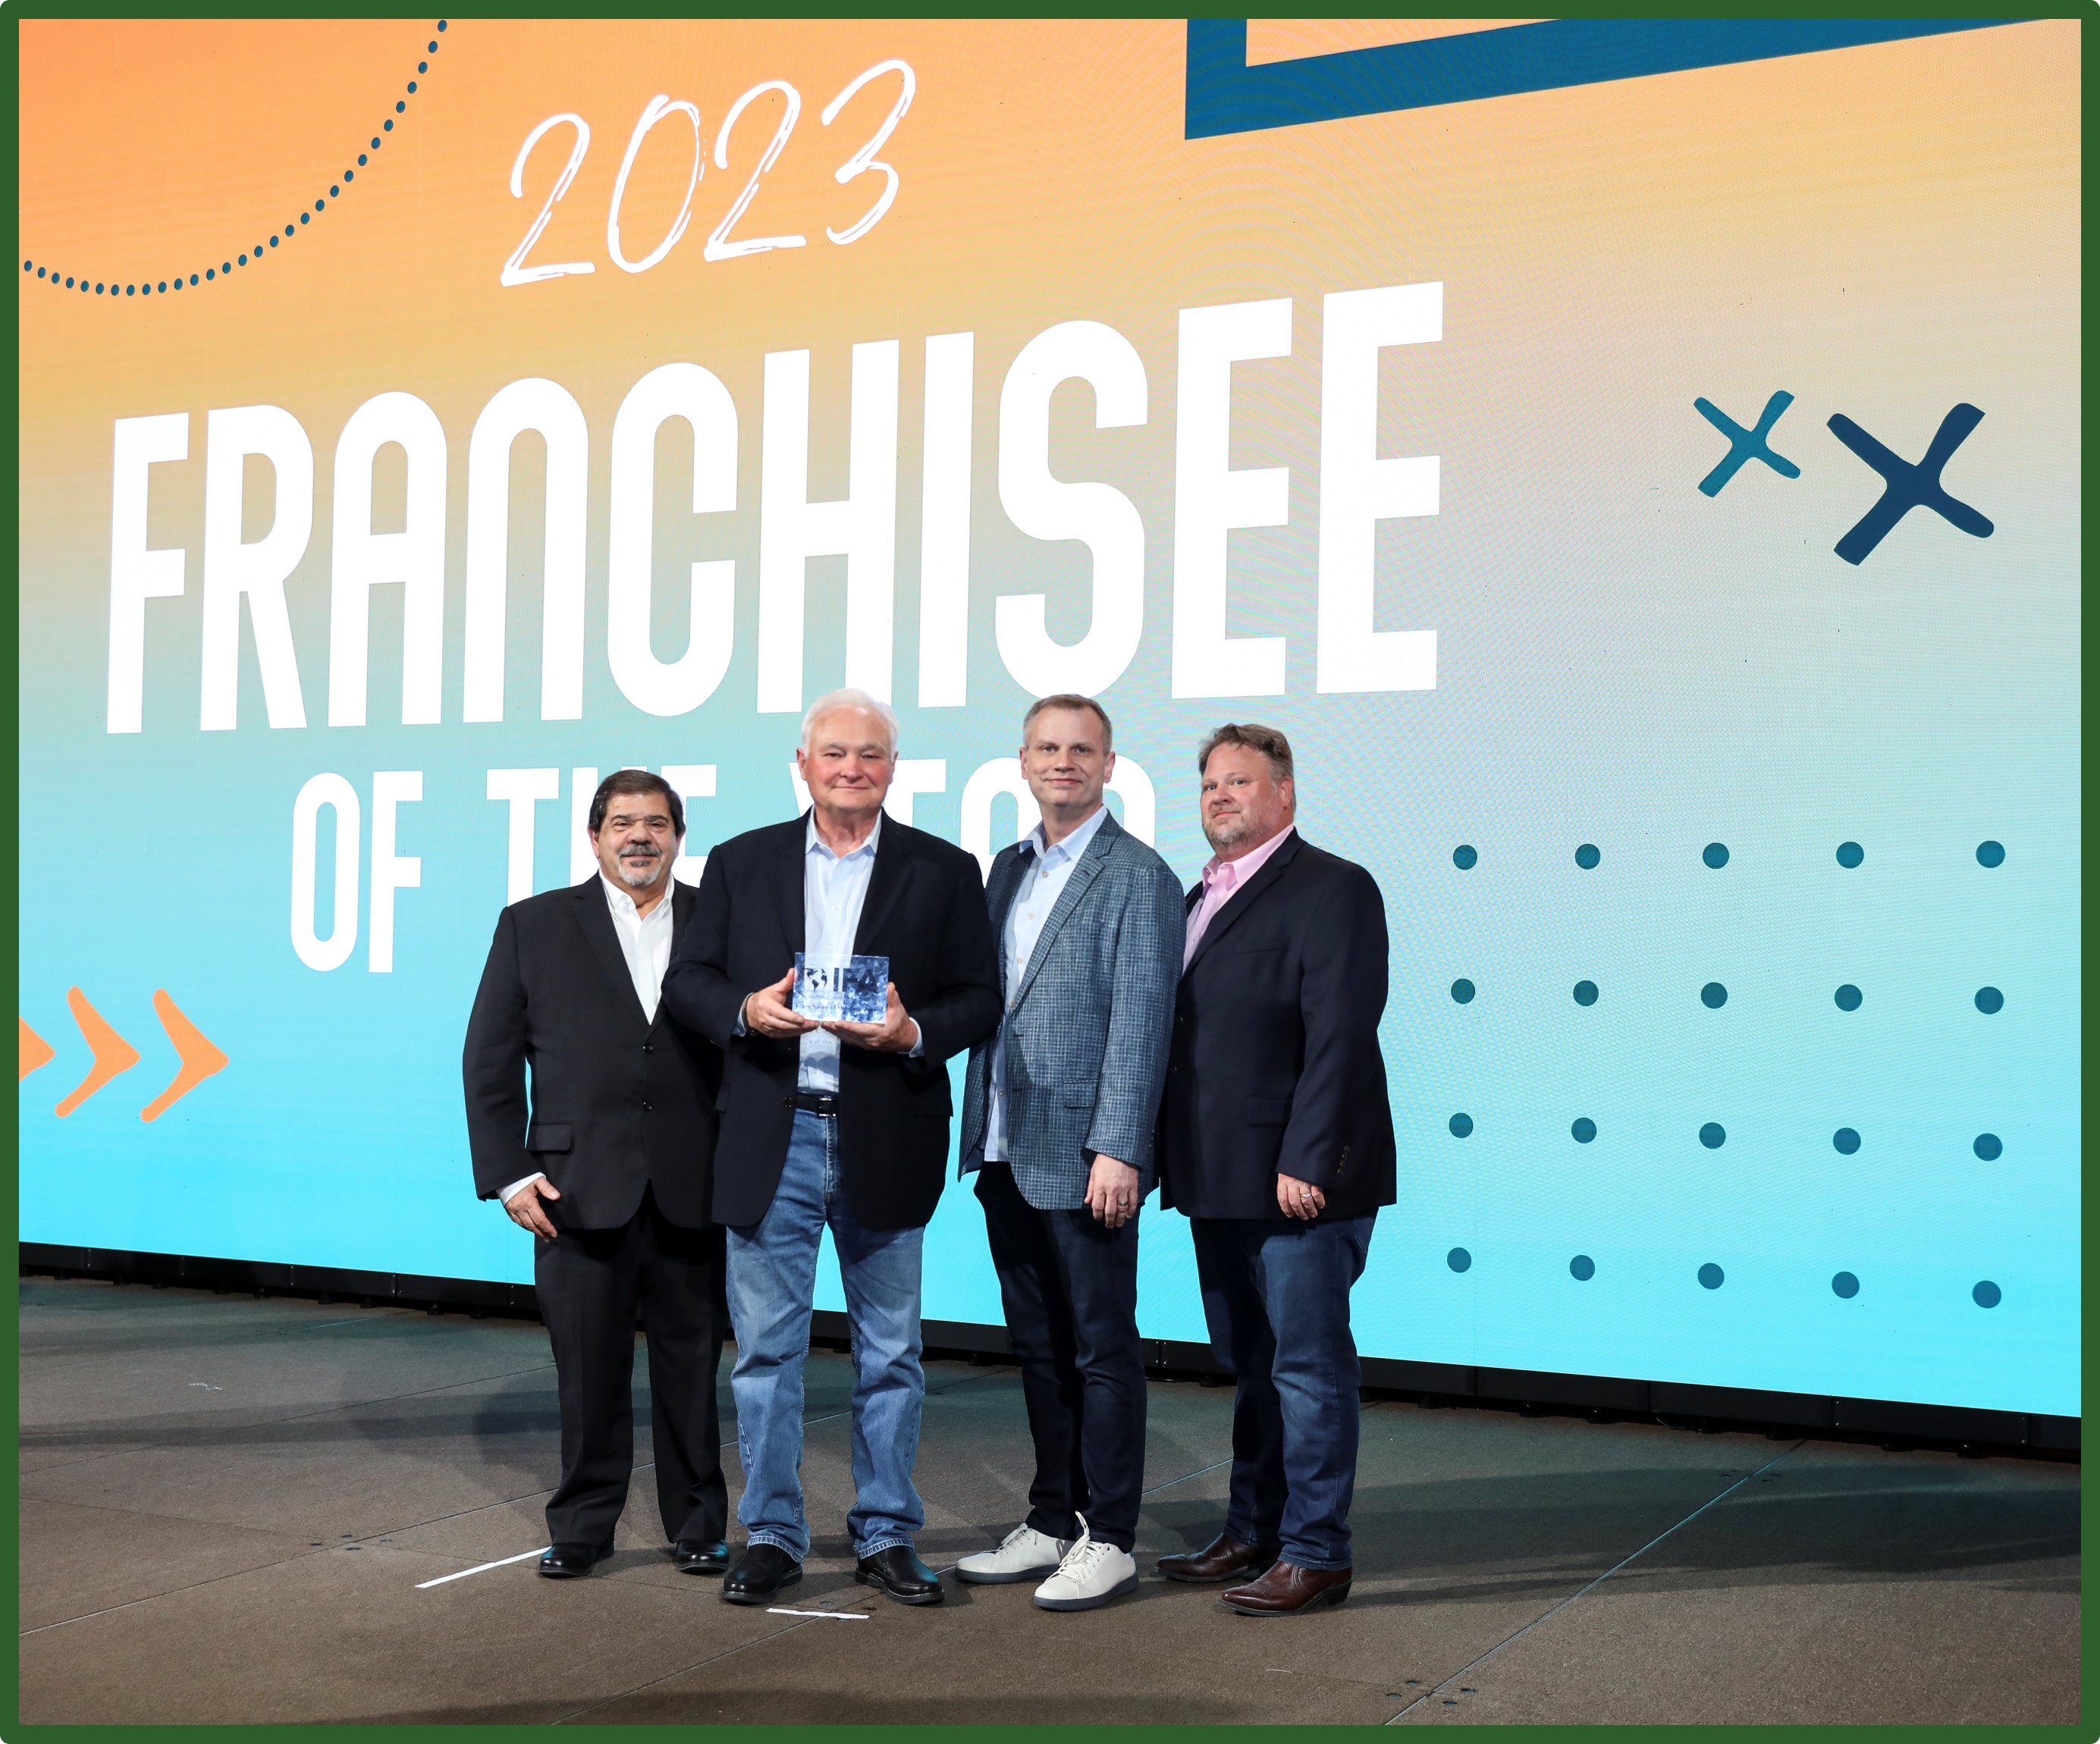 Ed Taliaferro is named a 2023 Franchisee of the Year by IFA